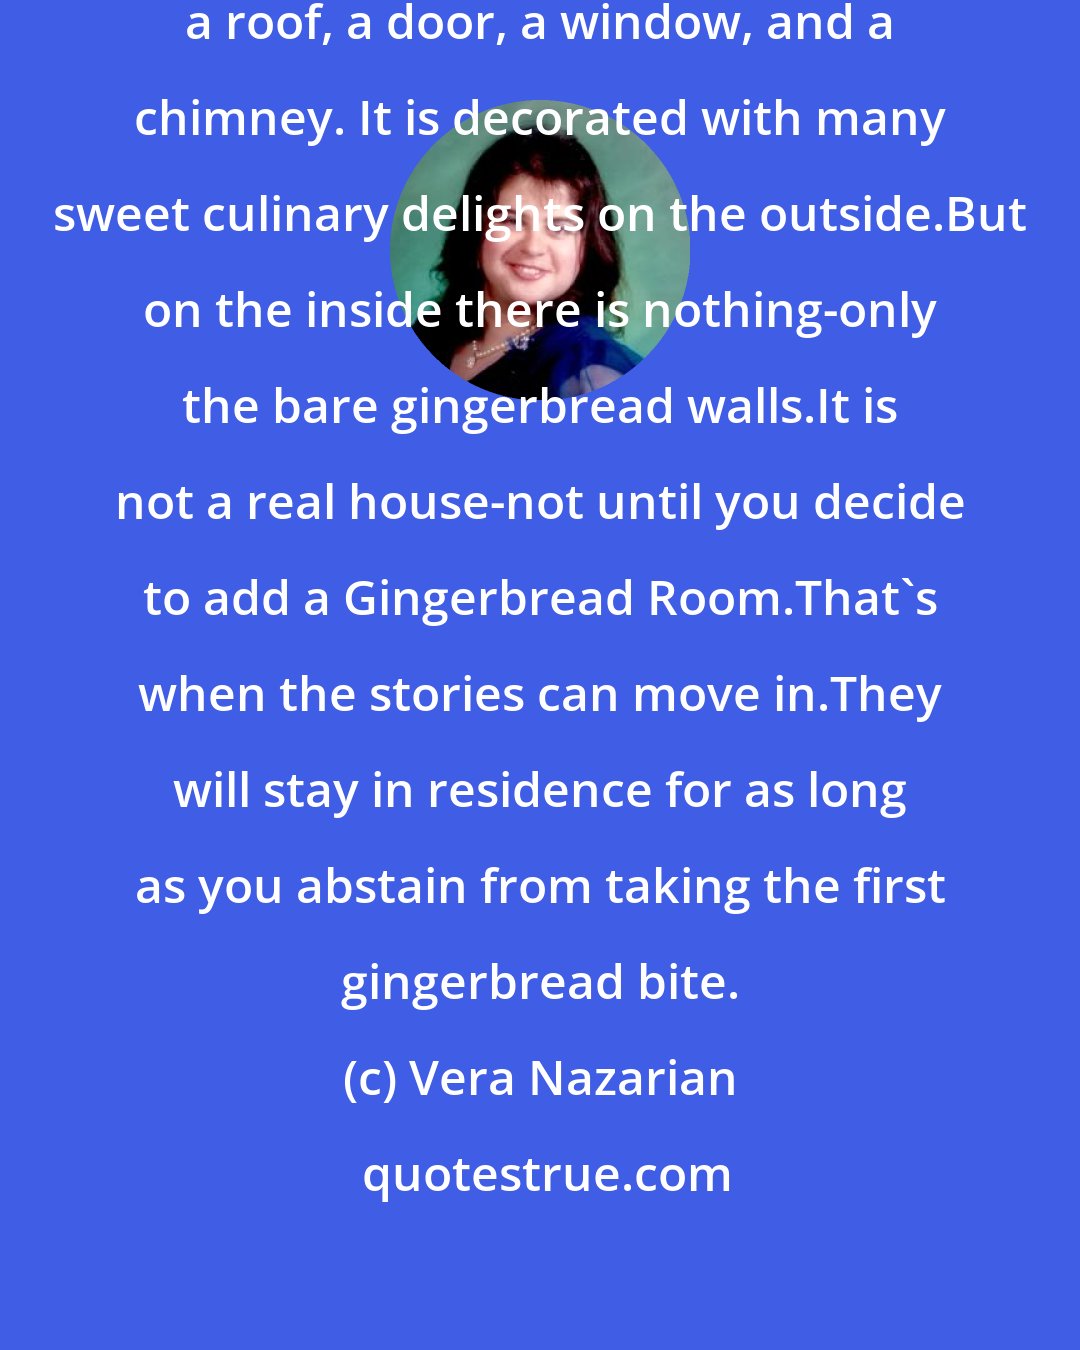 Vera Nazarian: The Gingerbread House has four walls, a roof, a door, a window, and a chimney. It is decorated with many sweet culinary delights on the outside.But on the inside there is nothing-only the bare gingerbread walls.It is not a real house-not until you decide to add a Gingerbread Room.That's when the stories can move in.They will stay in residence for as long as you abstain from taking the first gingerbread bite.